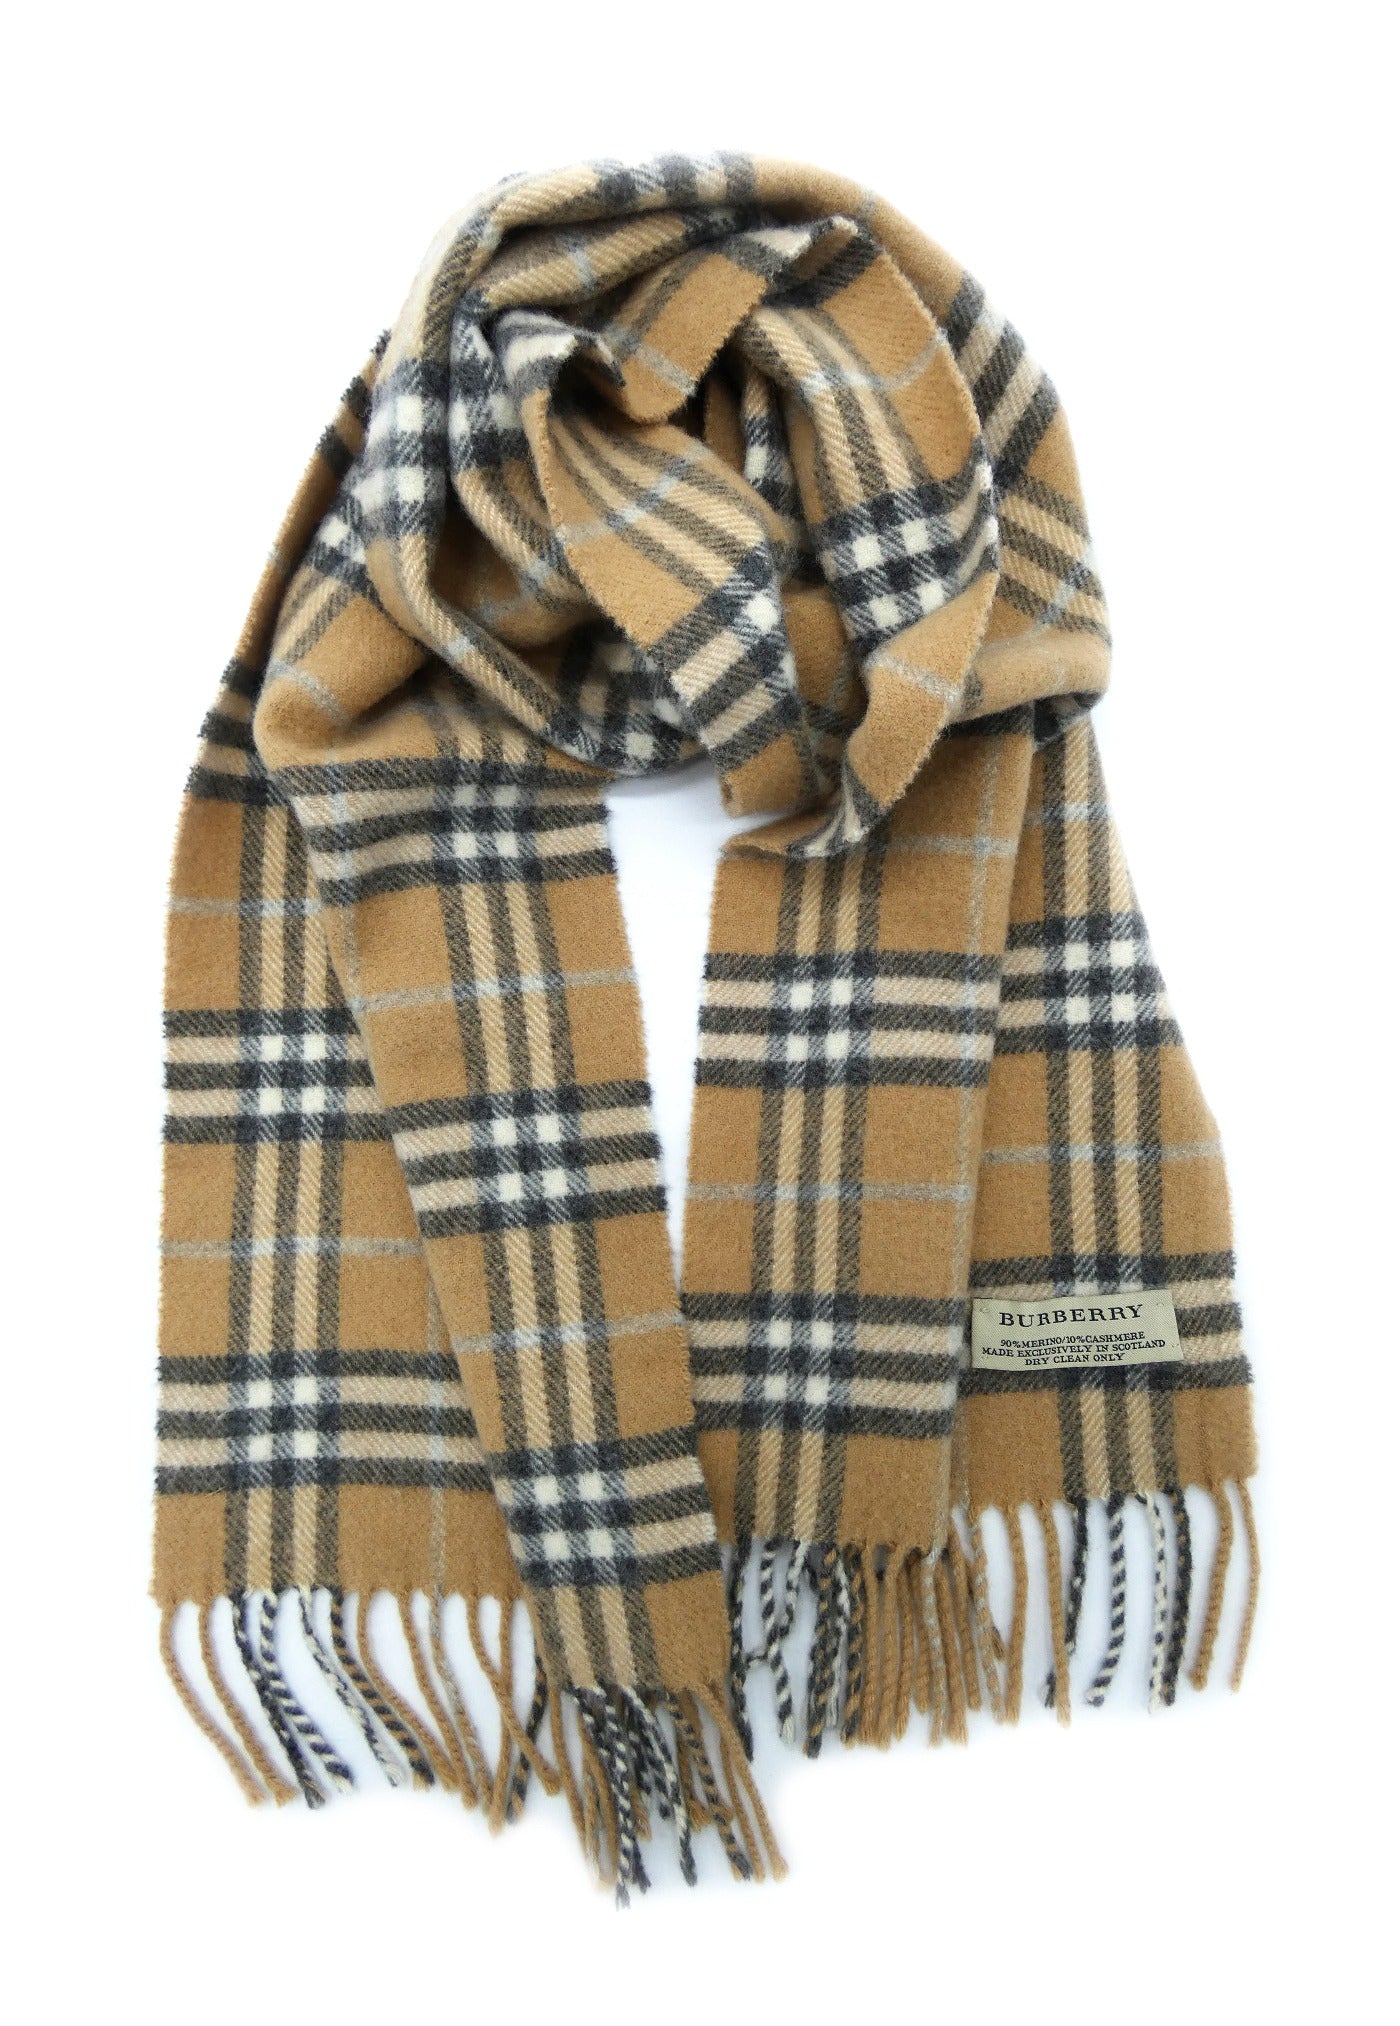 Burberry Merino Wool and Cashmere House Check Camel Scarf Scarf Burberry